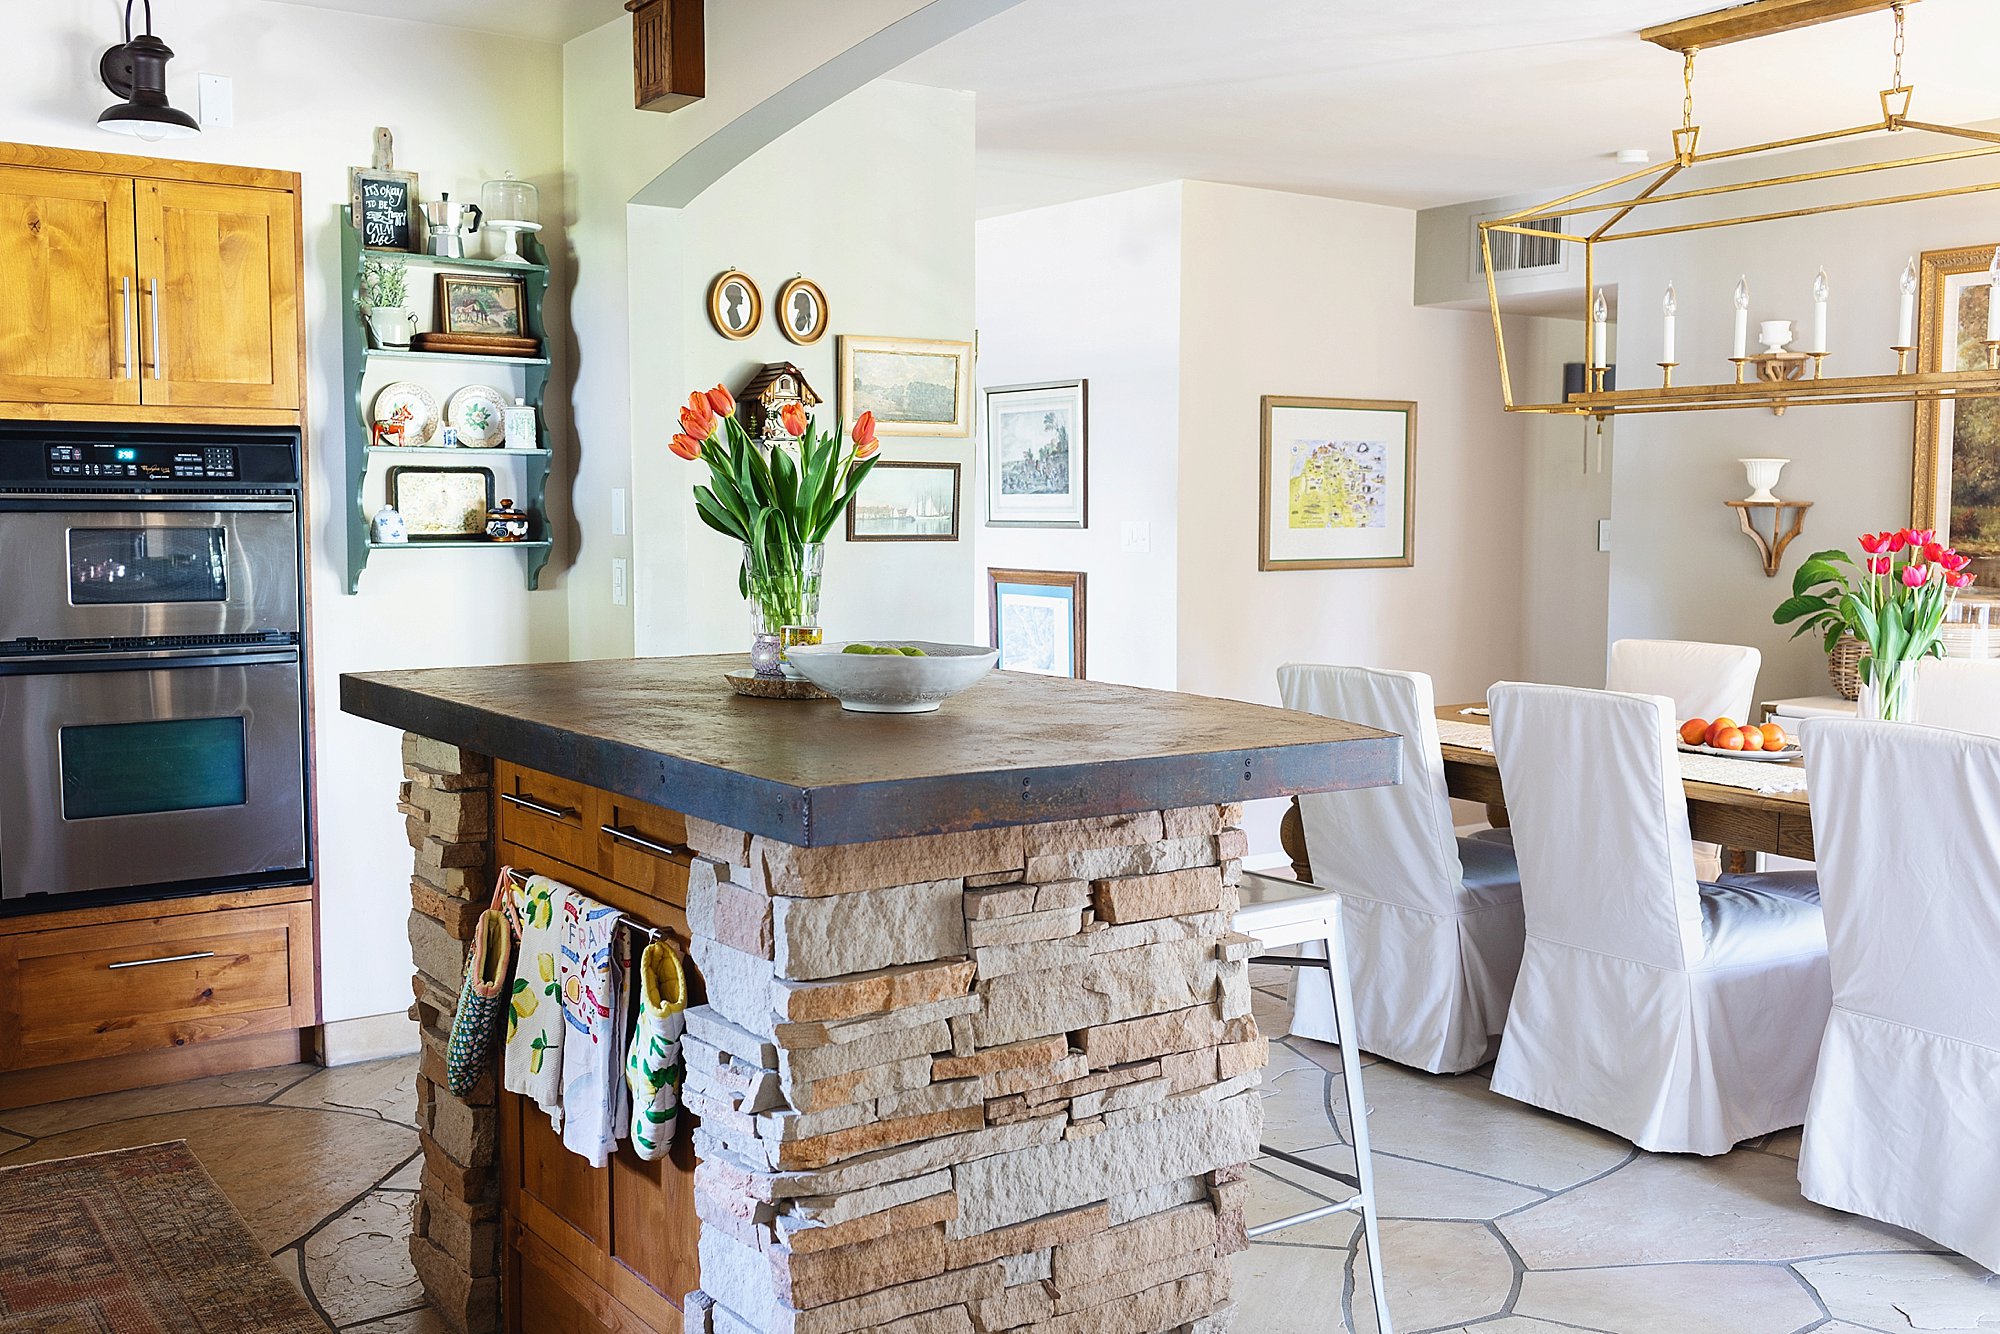 Kitchen style white walker Zanger 6yth avenue cocoon tile in Phoenix lifestyle blogger Diana Elizabeth's home. Cottage rustic style kitchen with flagstone an cement island